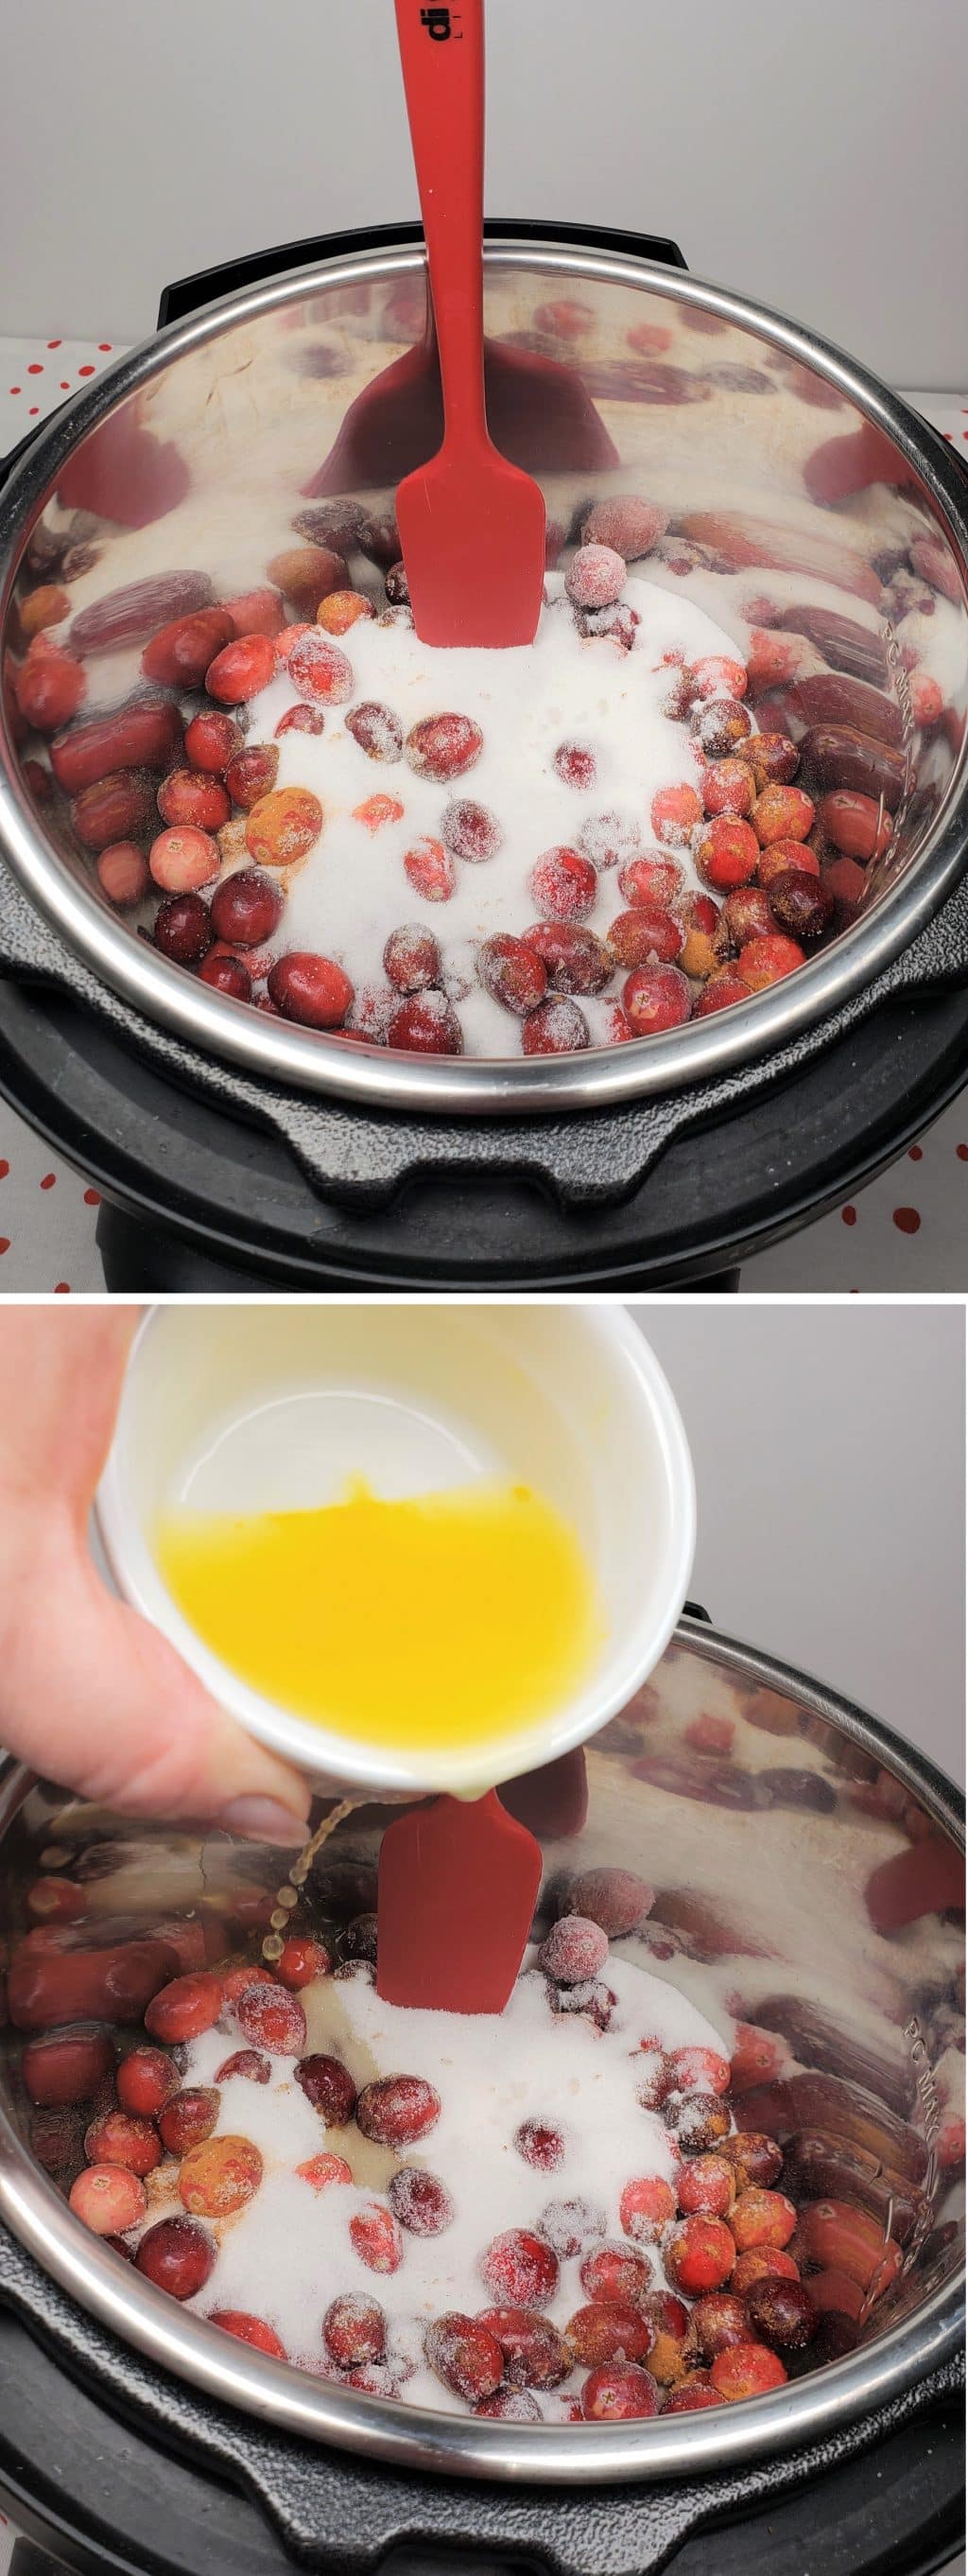 Sugar and Juice Mixed into Cranberries